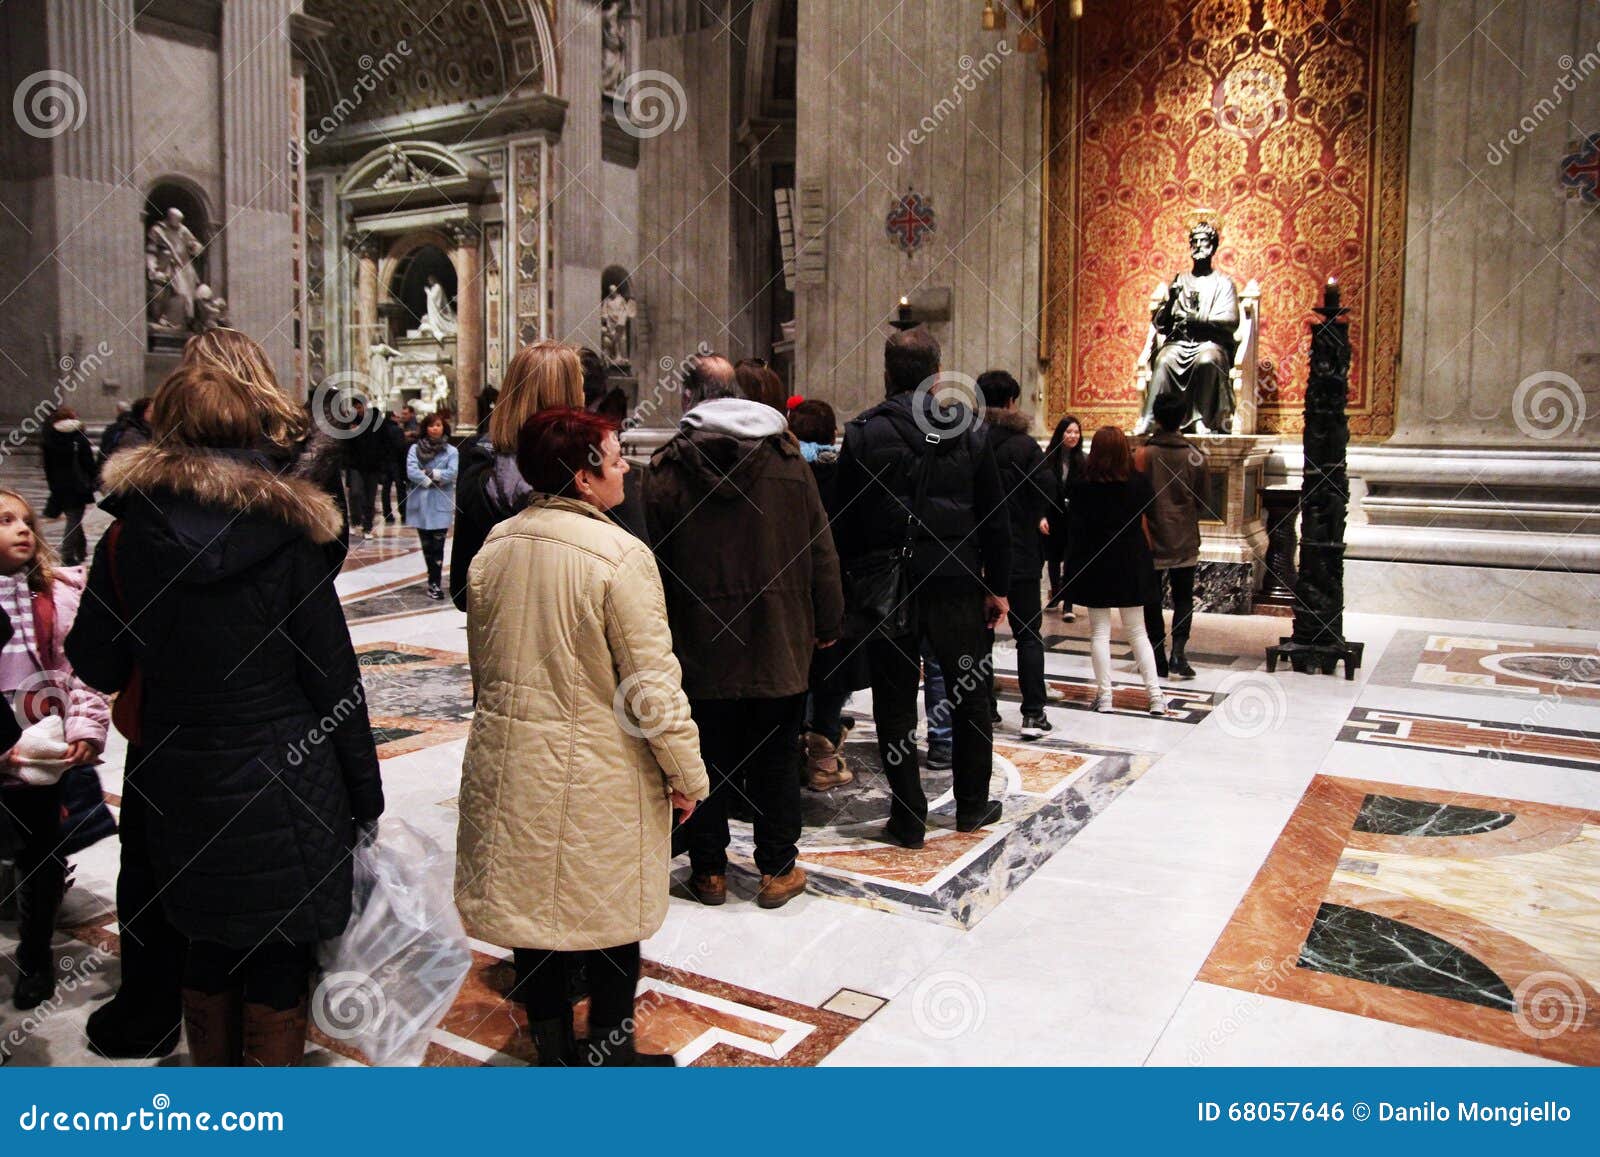 St. peter line. The line of believers in front of the holy statue of st. peter inside his basilica at rome in italy